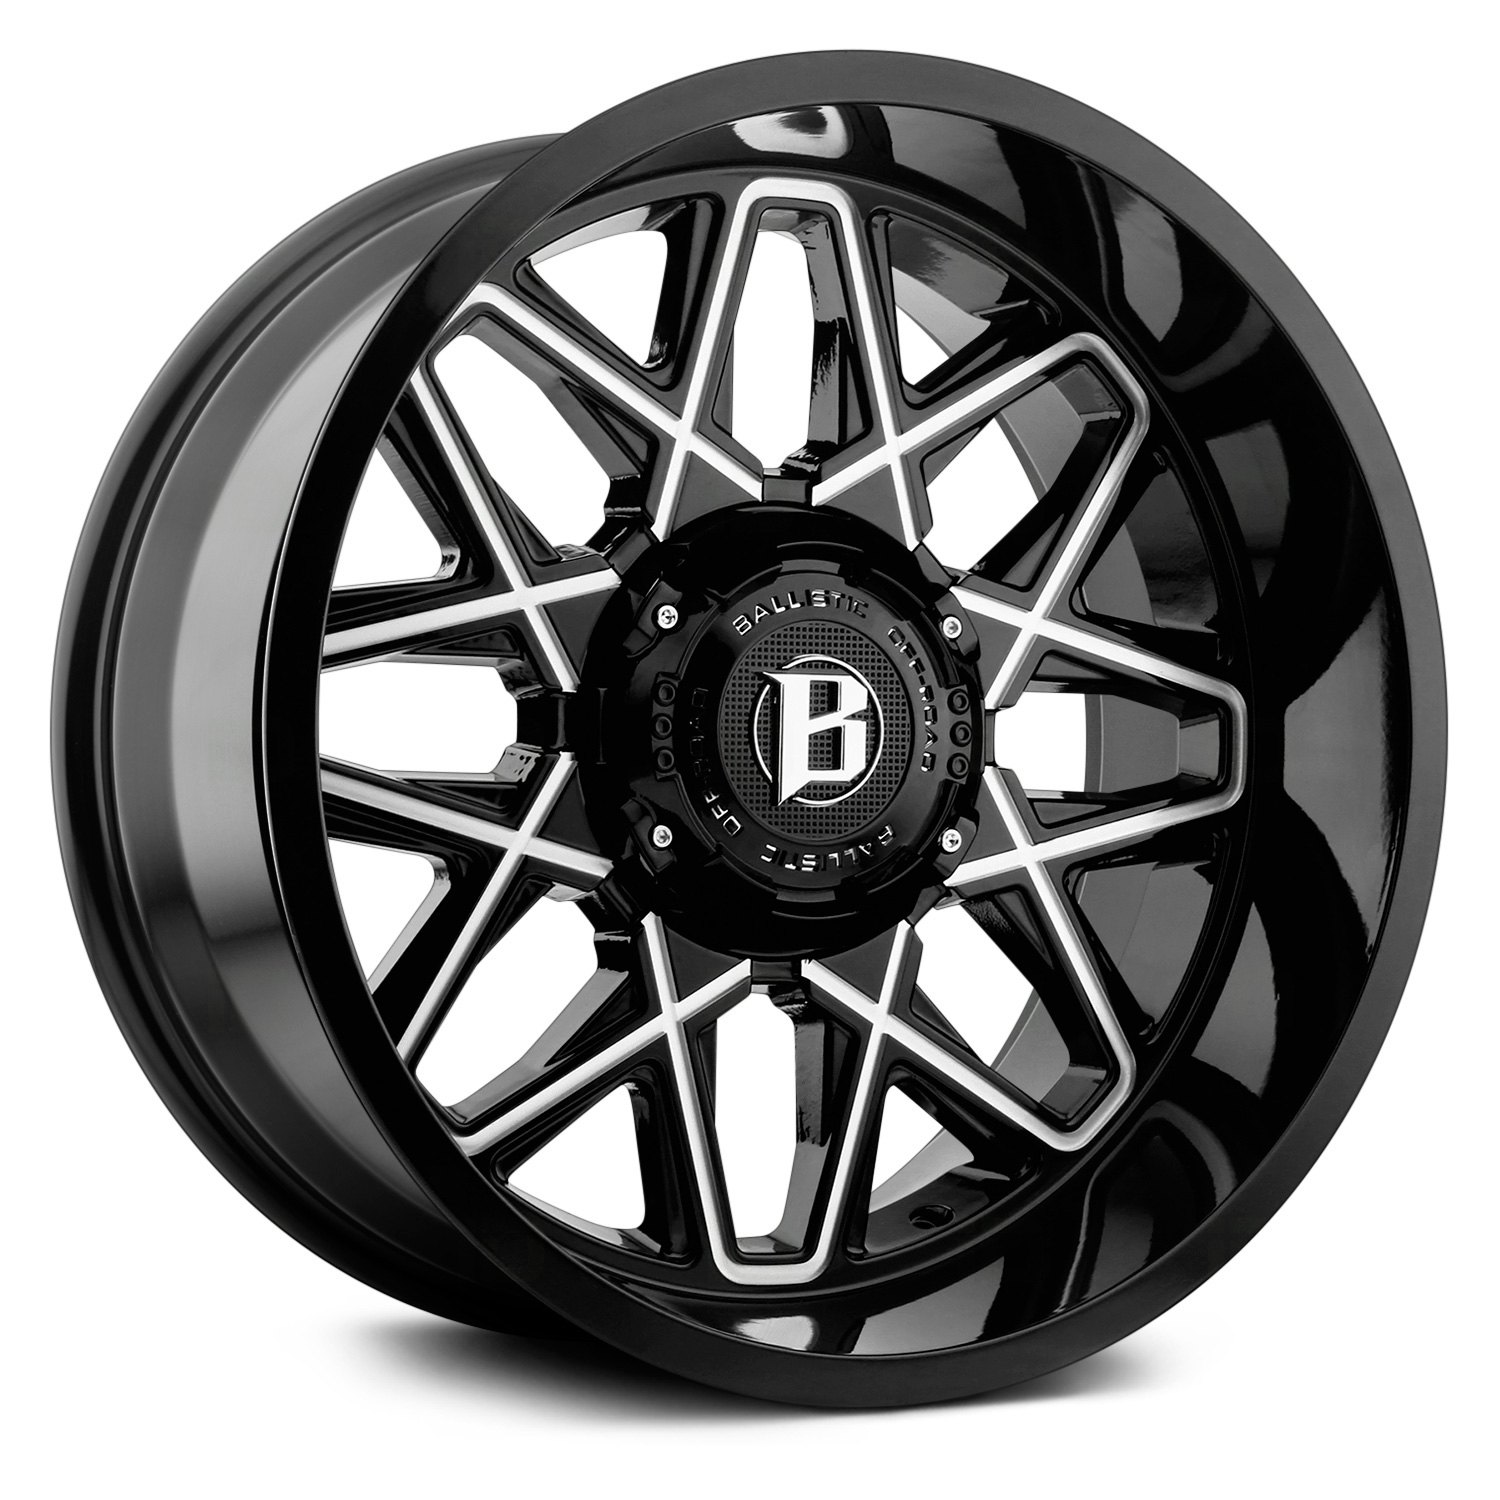 BALLISTIC OFF-ROAD® 818 ATOMIC Wheels - Gloss Black with Milled Windows ...